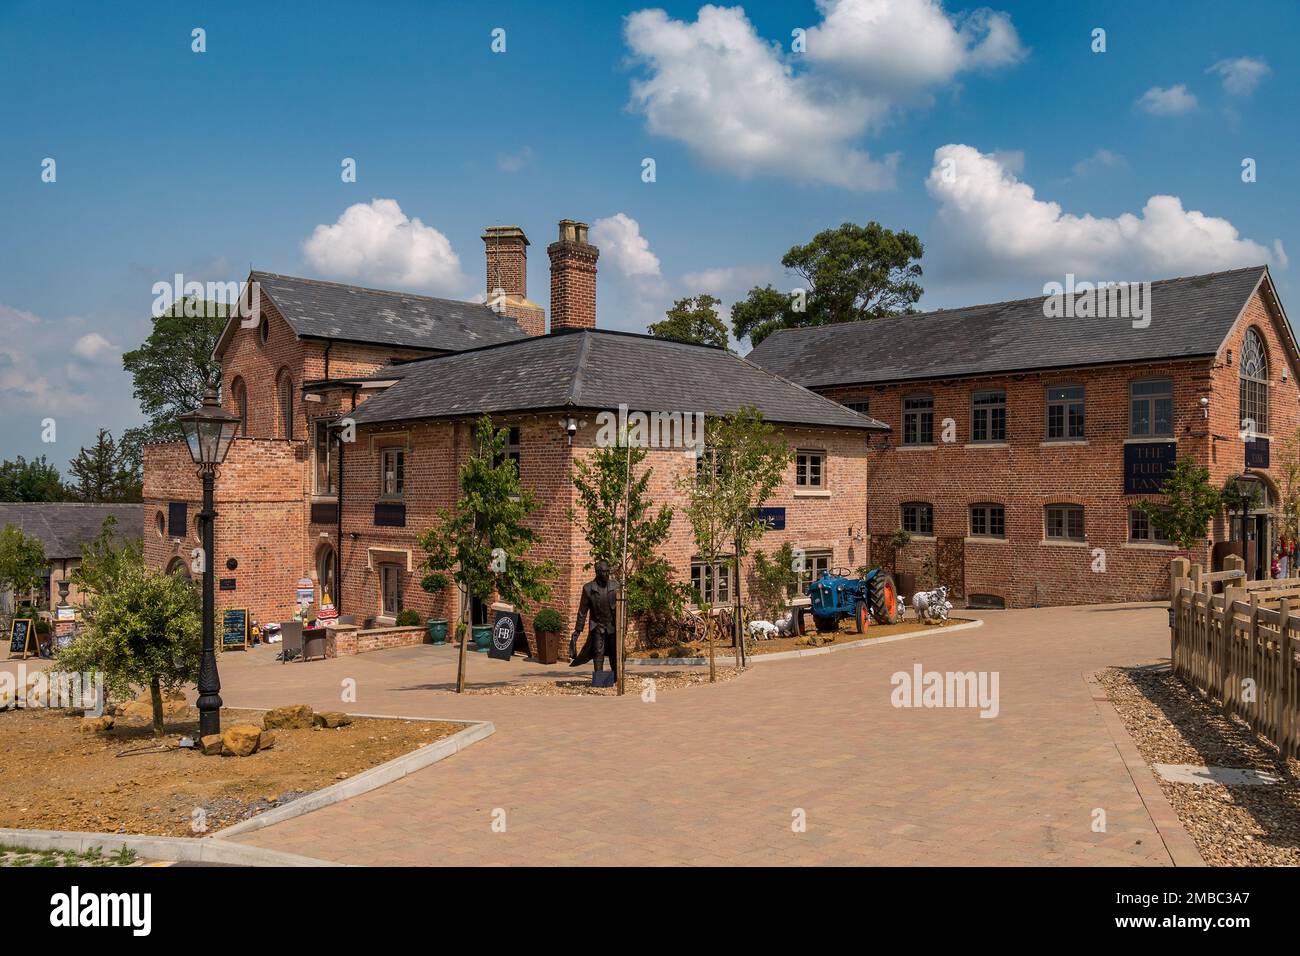 The Engine Yard retail village at Belvoir Castle near Grantham, Leicestershire, England, UK Stock Photo